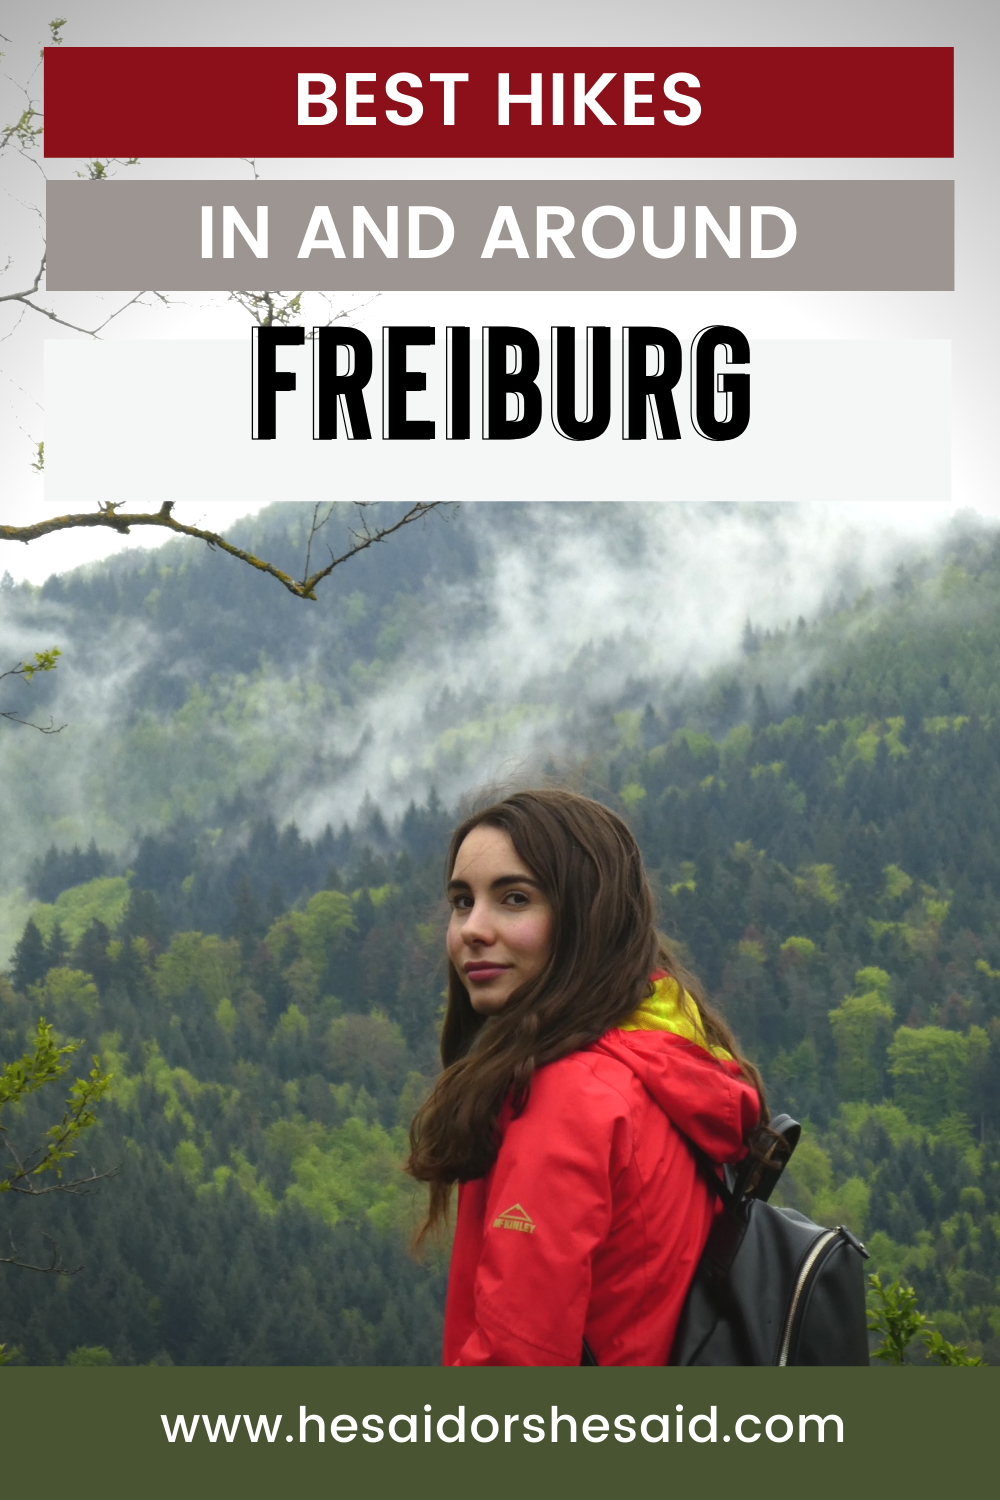 Best Hikes in and around Freiburg Germany by hesaidorshesaid